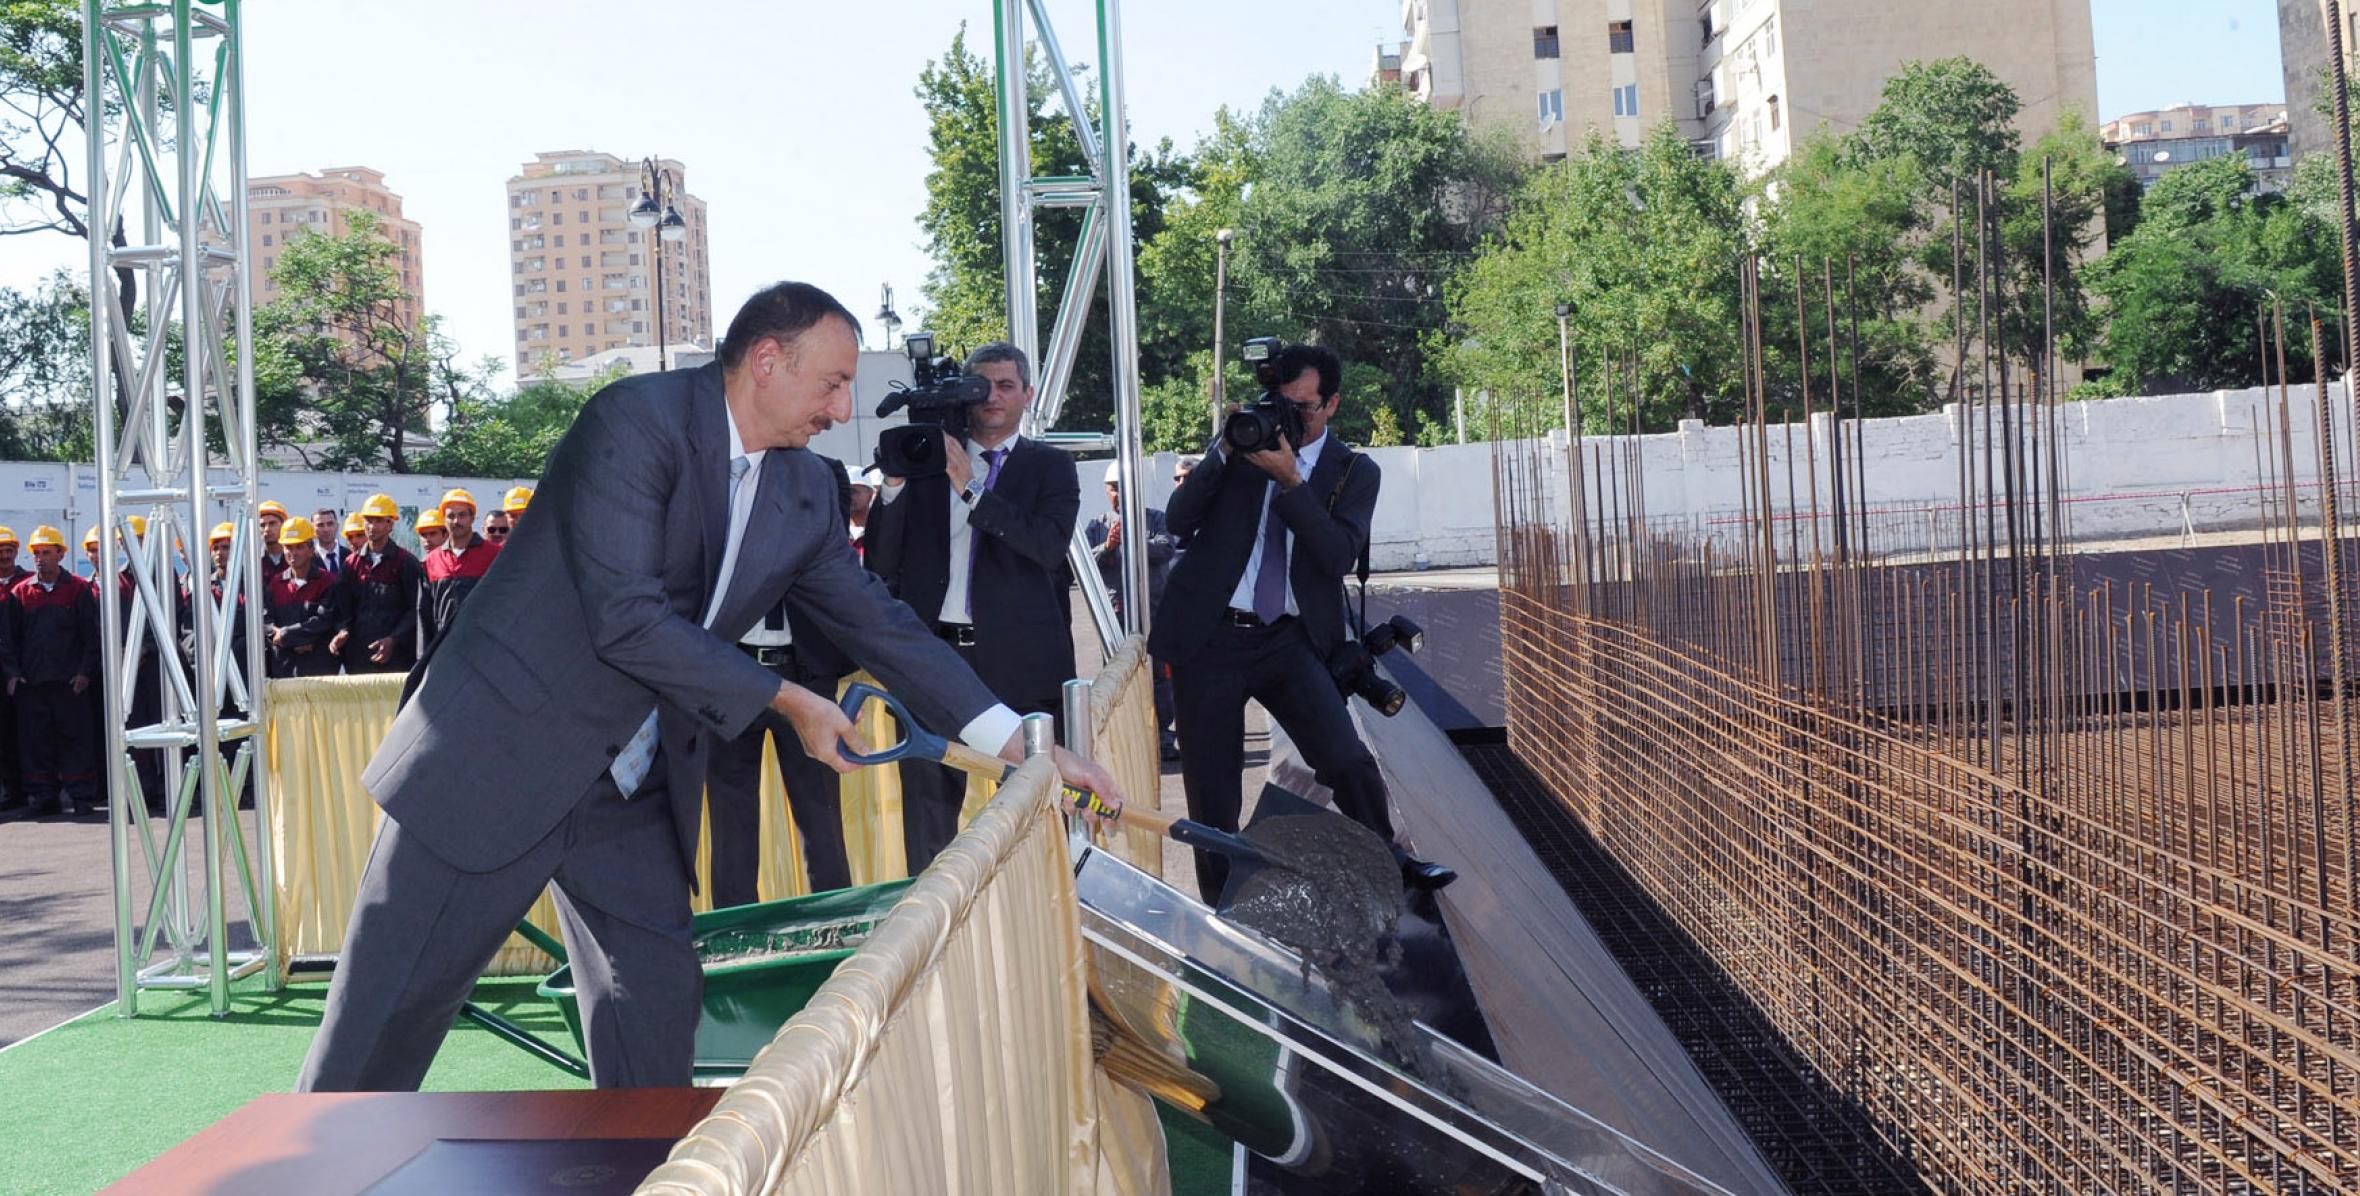 Ilham Aliyev attended the foundation-laying ceremony of the Baku Health Center